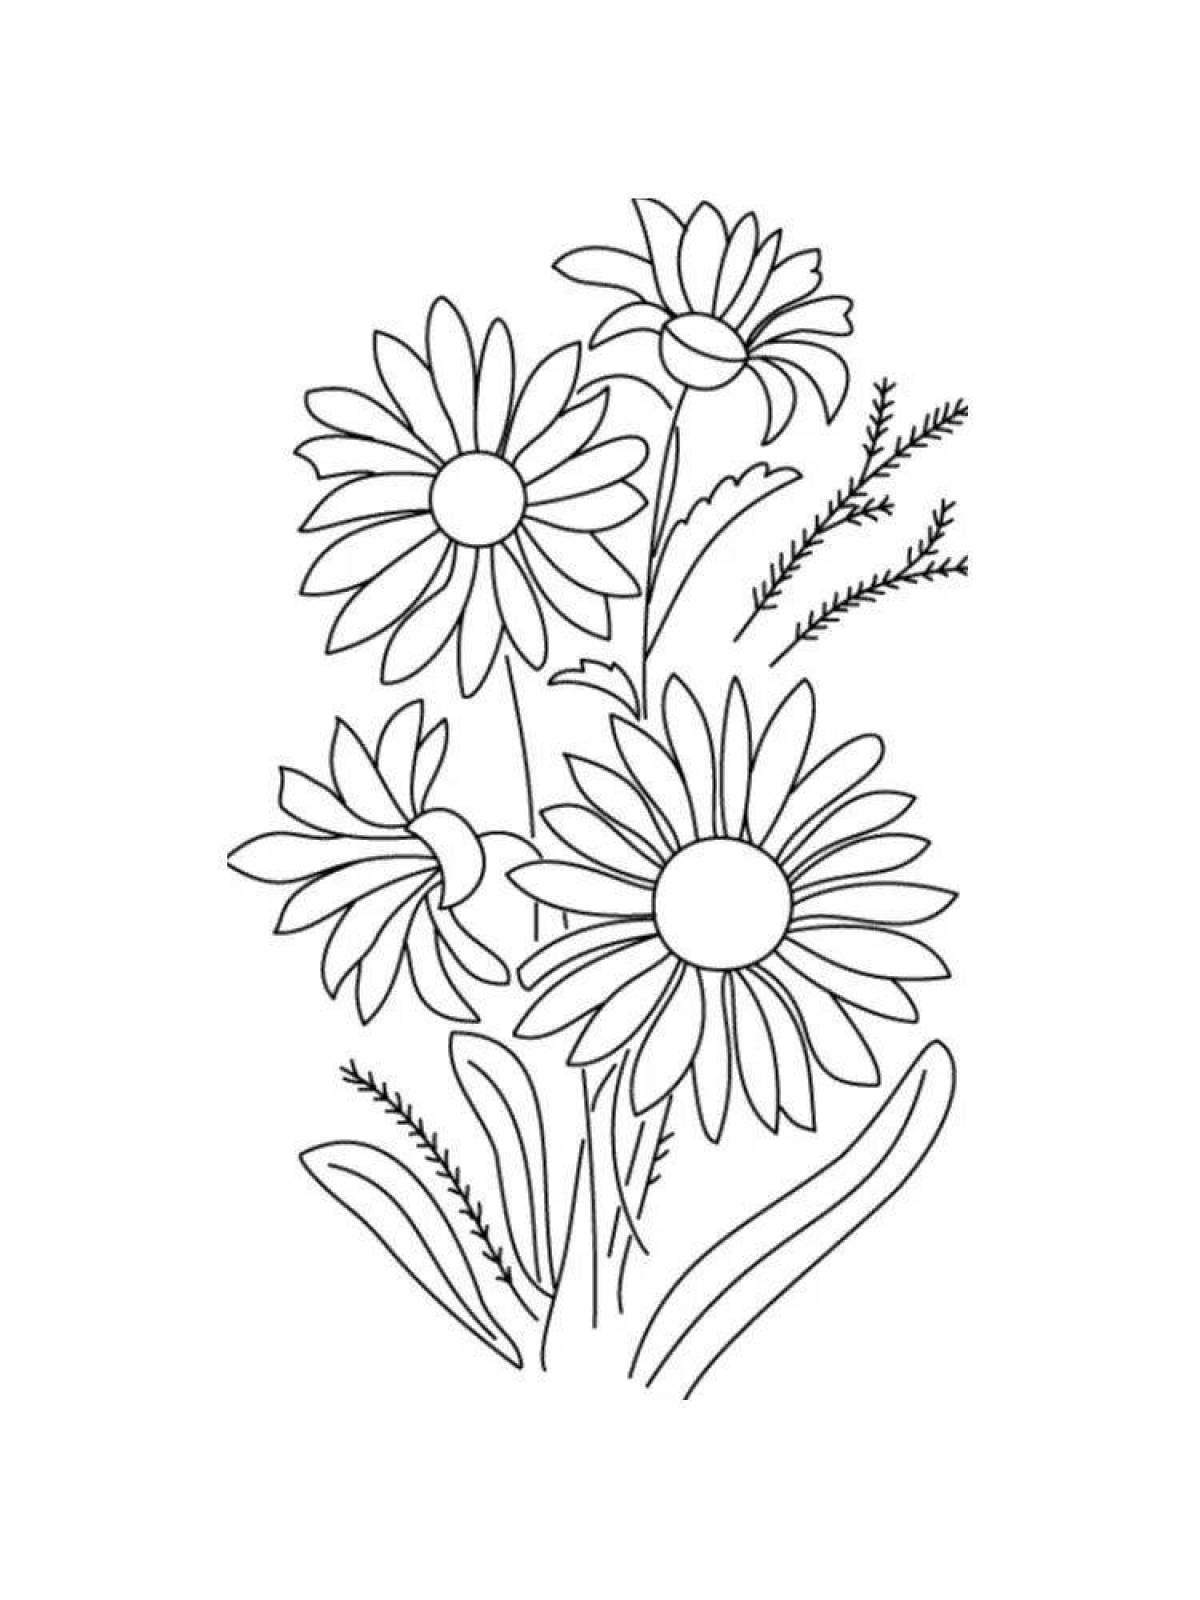 Coloring book captivating bouquet of daisies